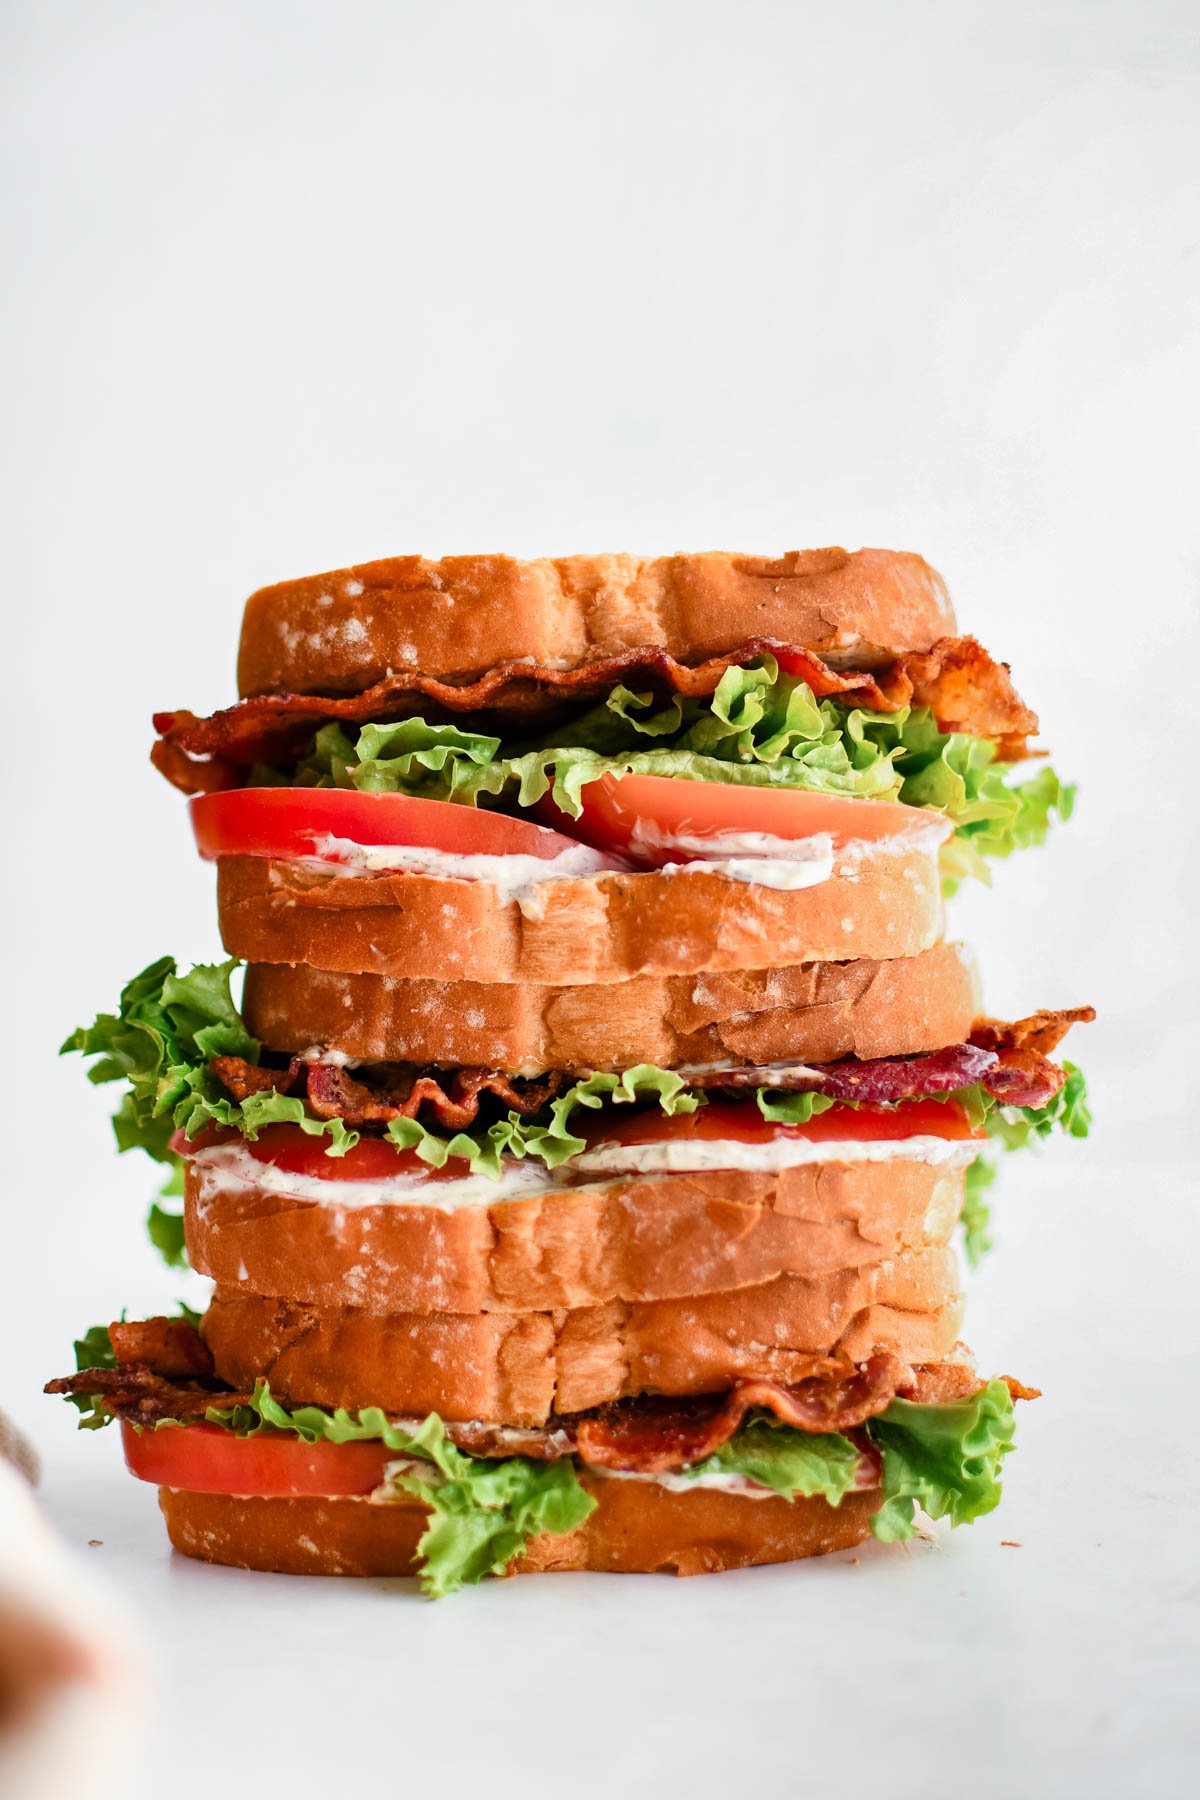 Stack of 3 blt sandwiches.